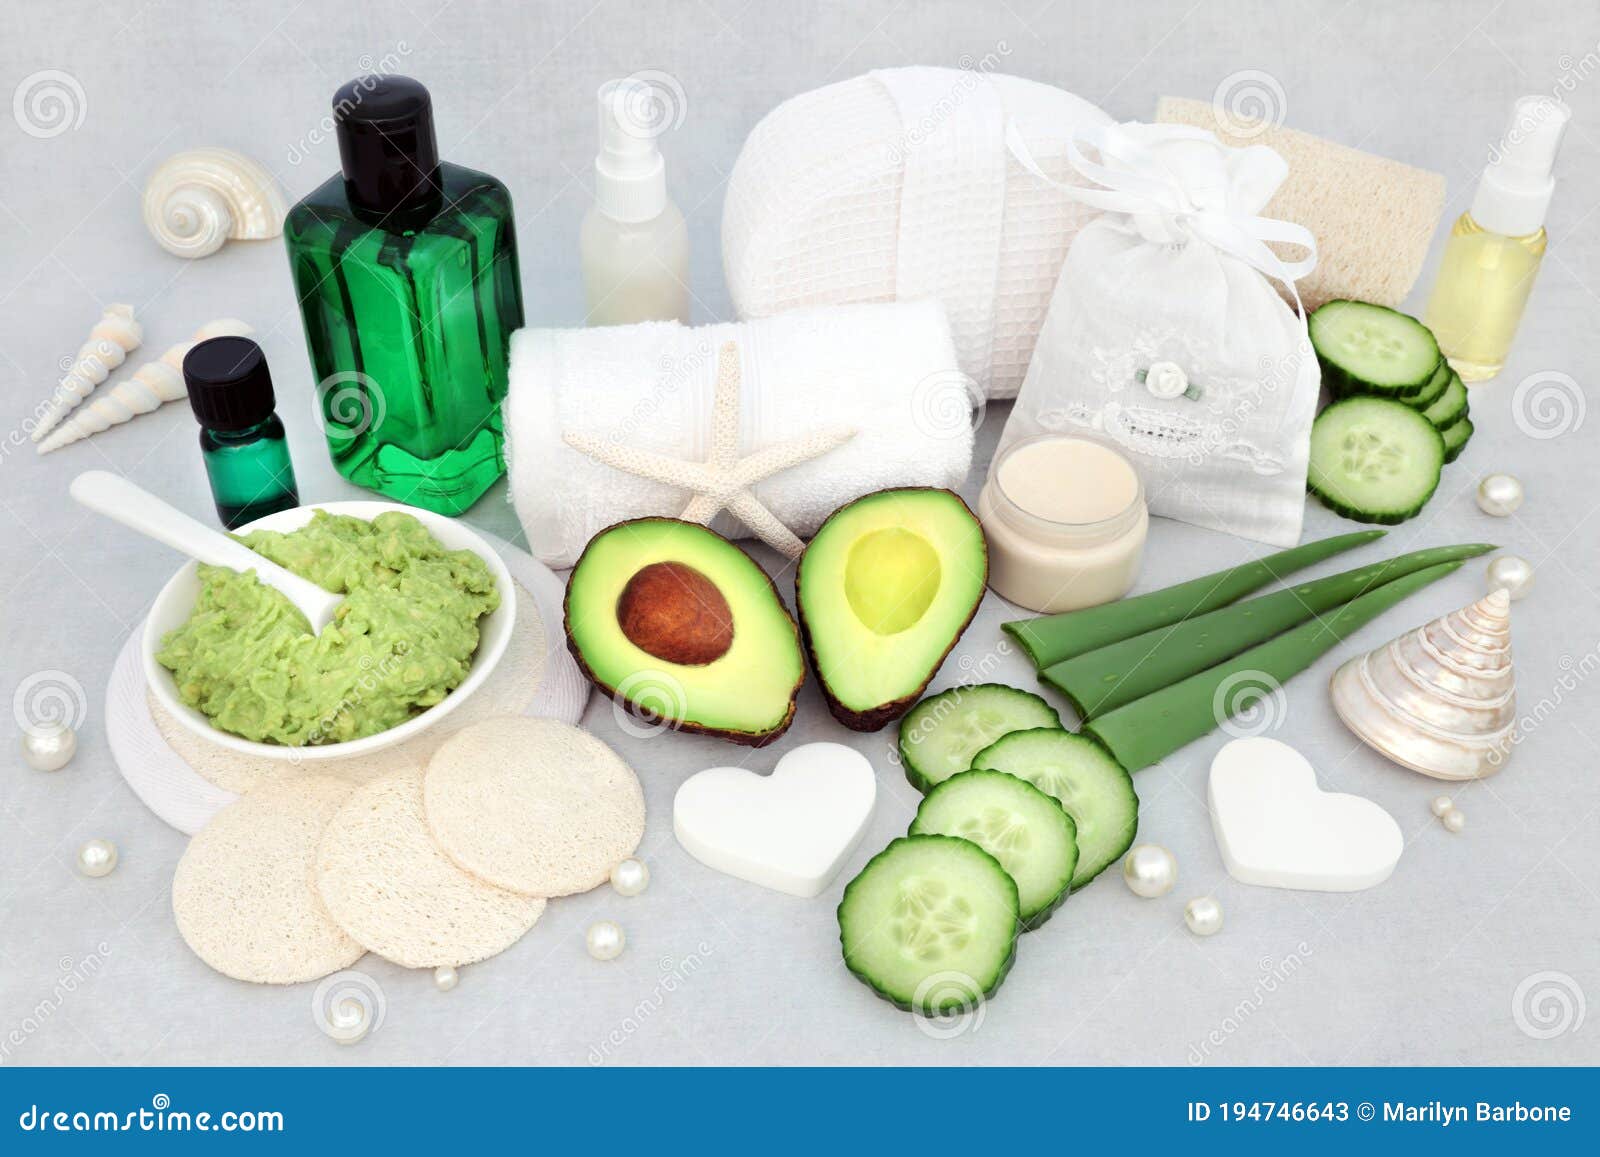 Natural Skin Care Beauty Treatment with Aloe and Avocado Stock Image